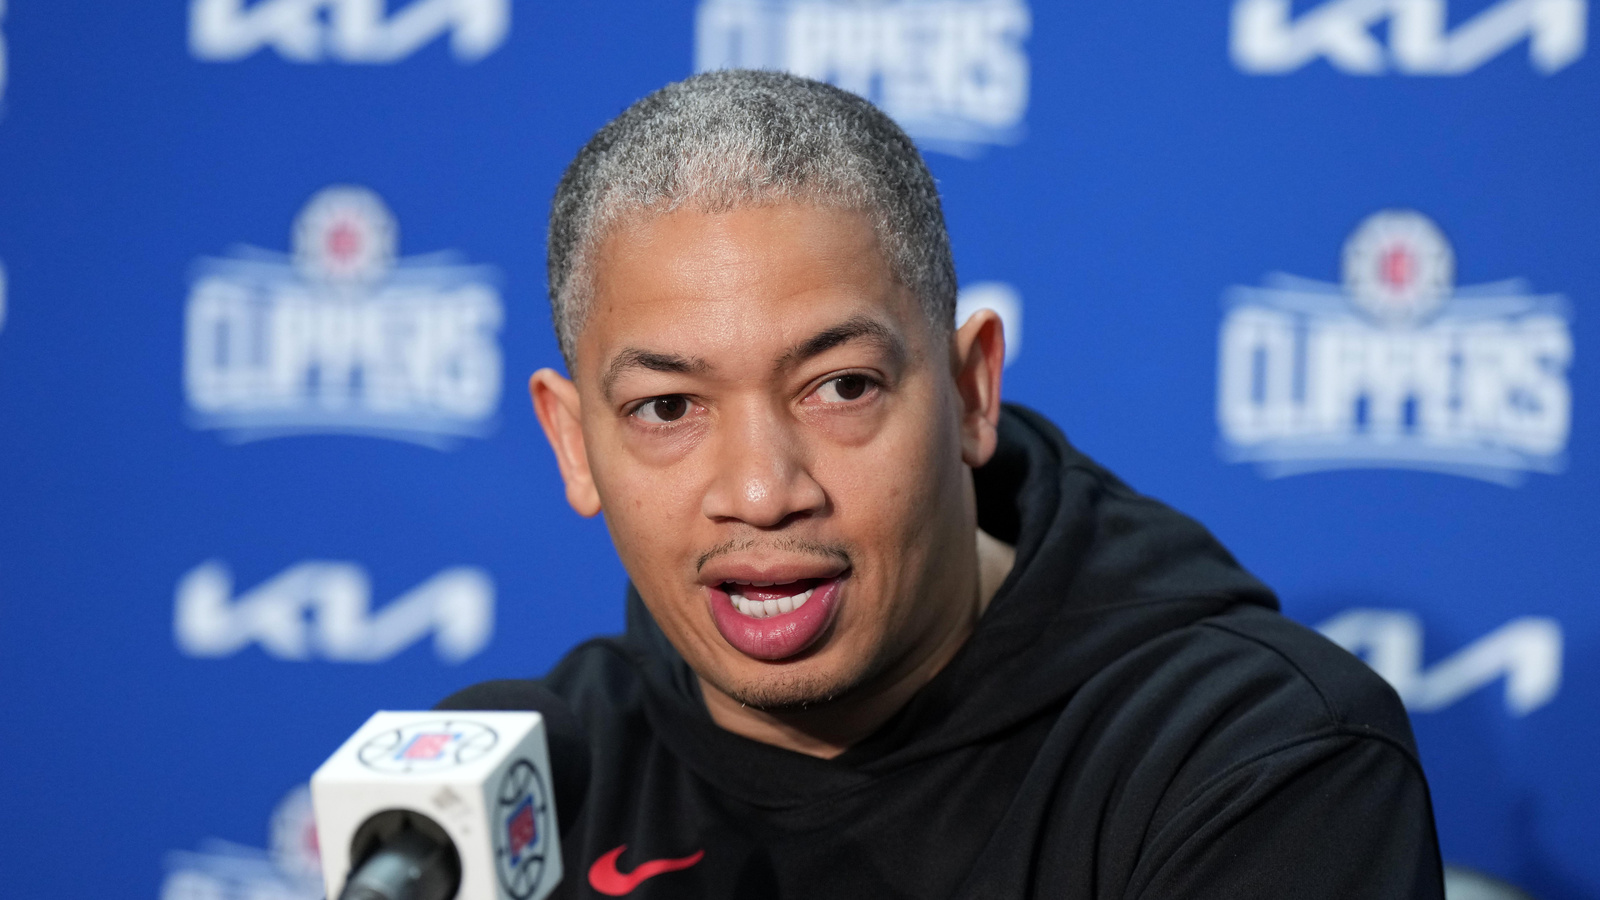 Clippers' Lue on Mann in James Harden trade rumors: 'T-Mann is